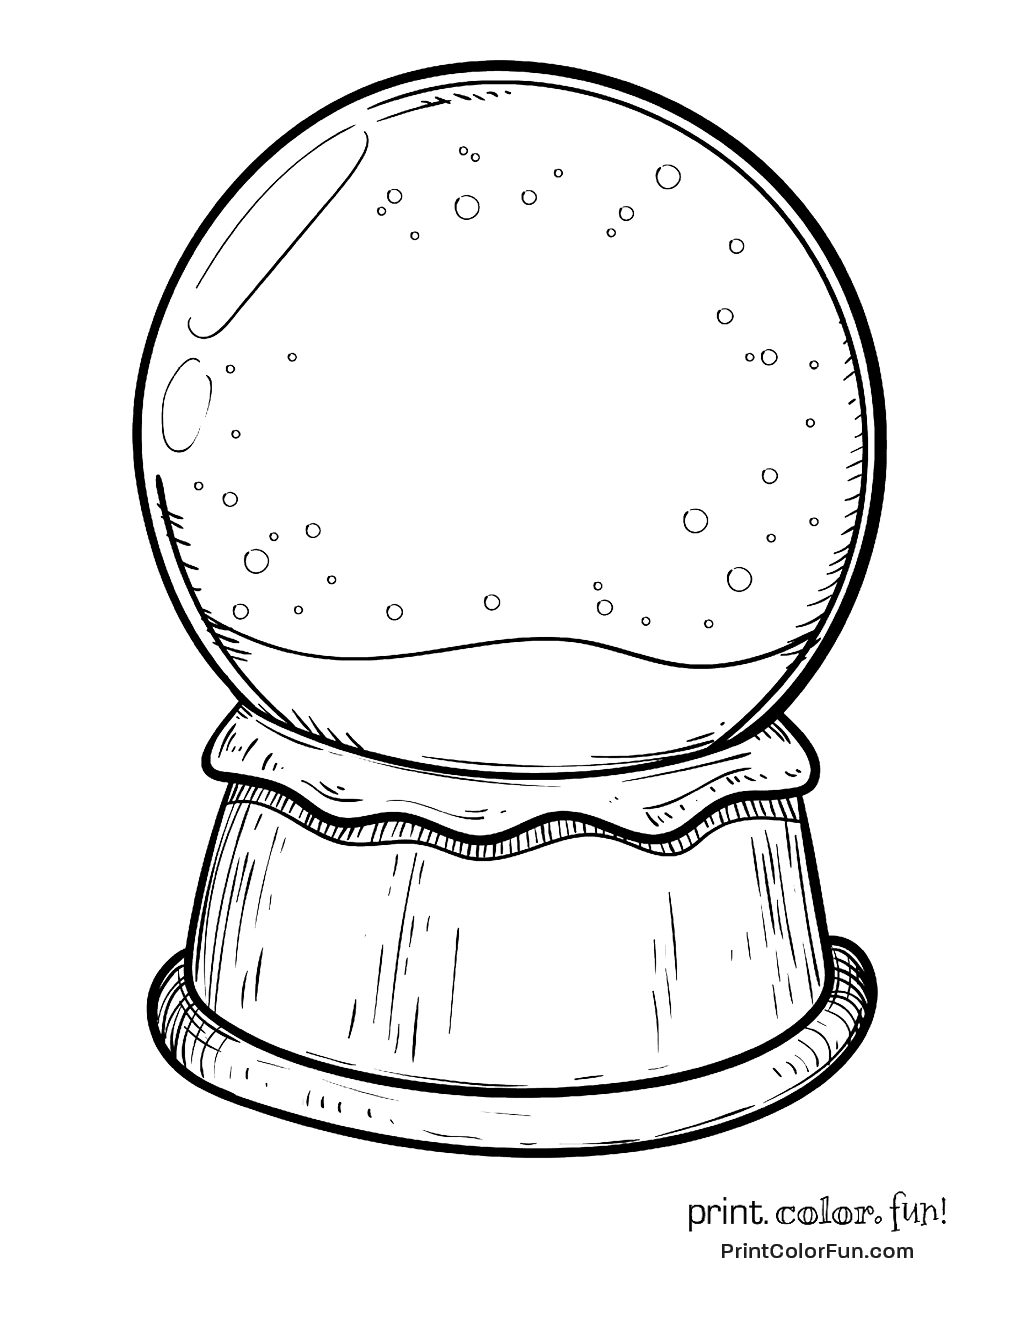 Blank snow globe coloring page - Print. Color. Fun!